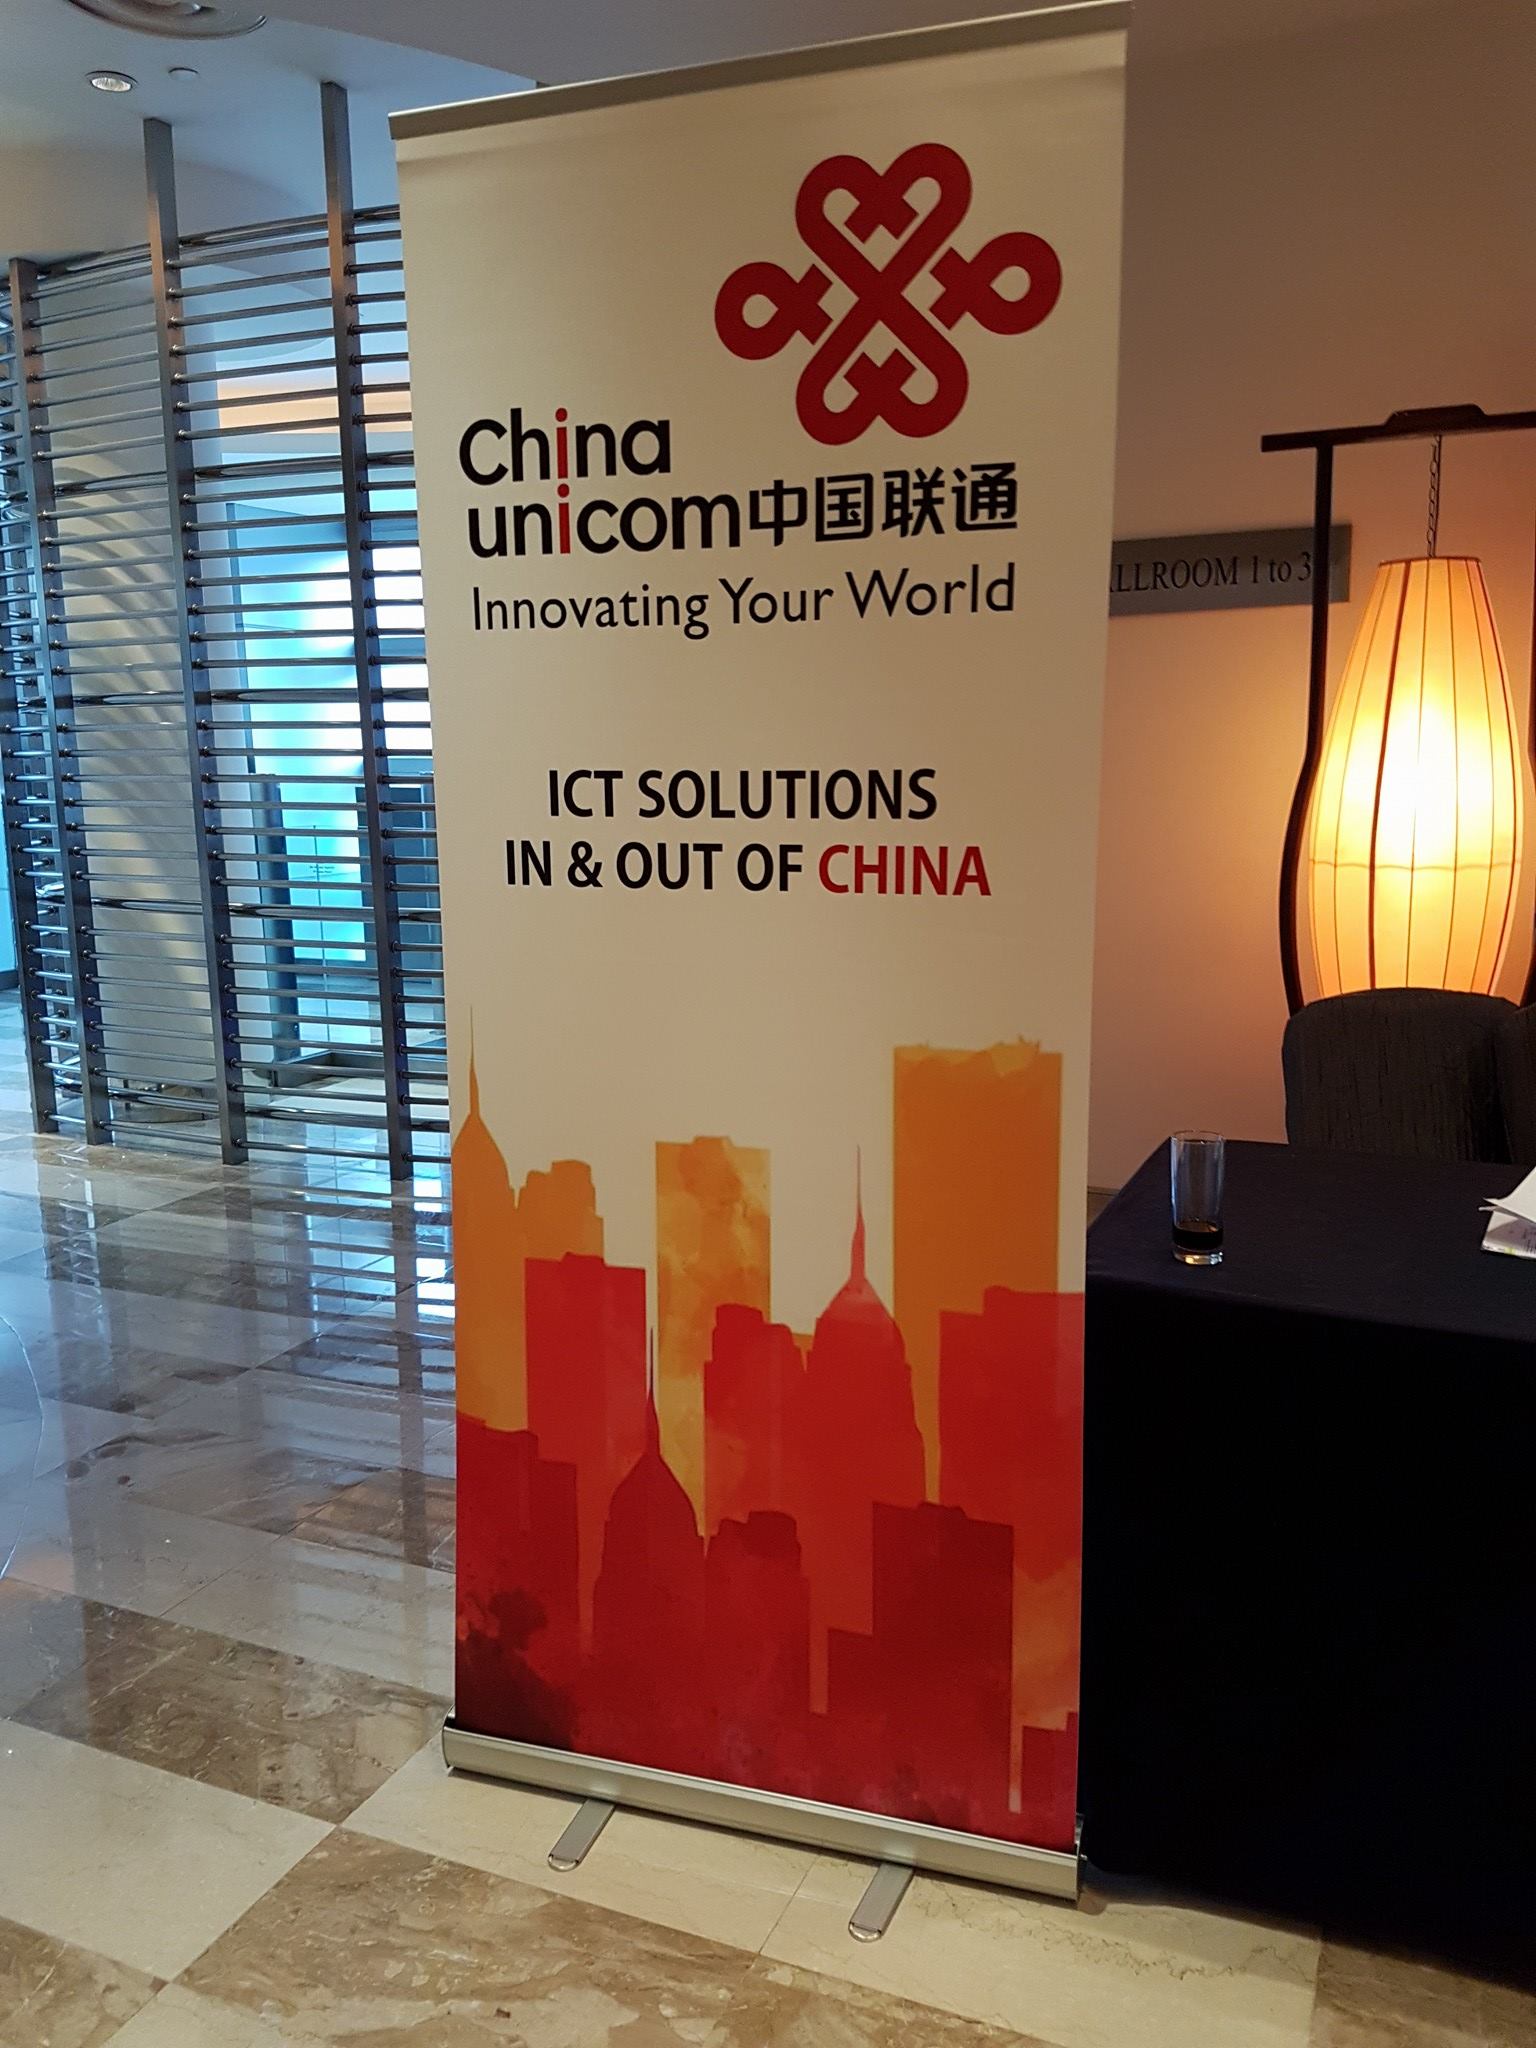 China Unicom ICT Solutions In & Out of China